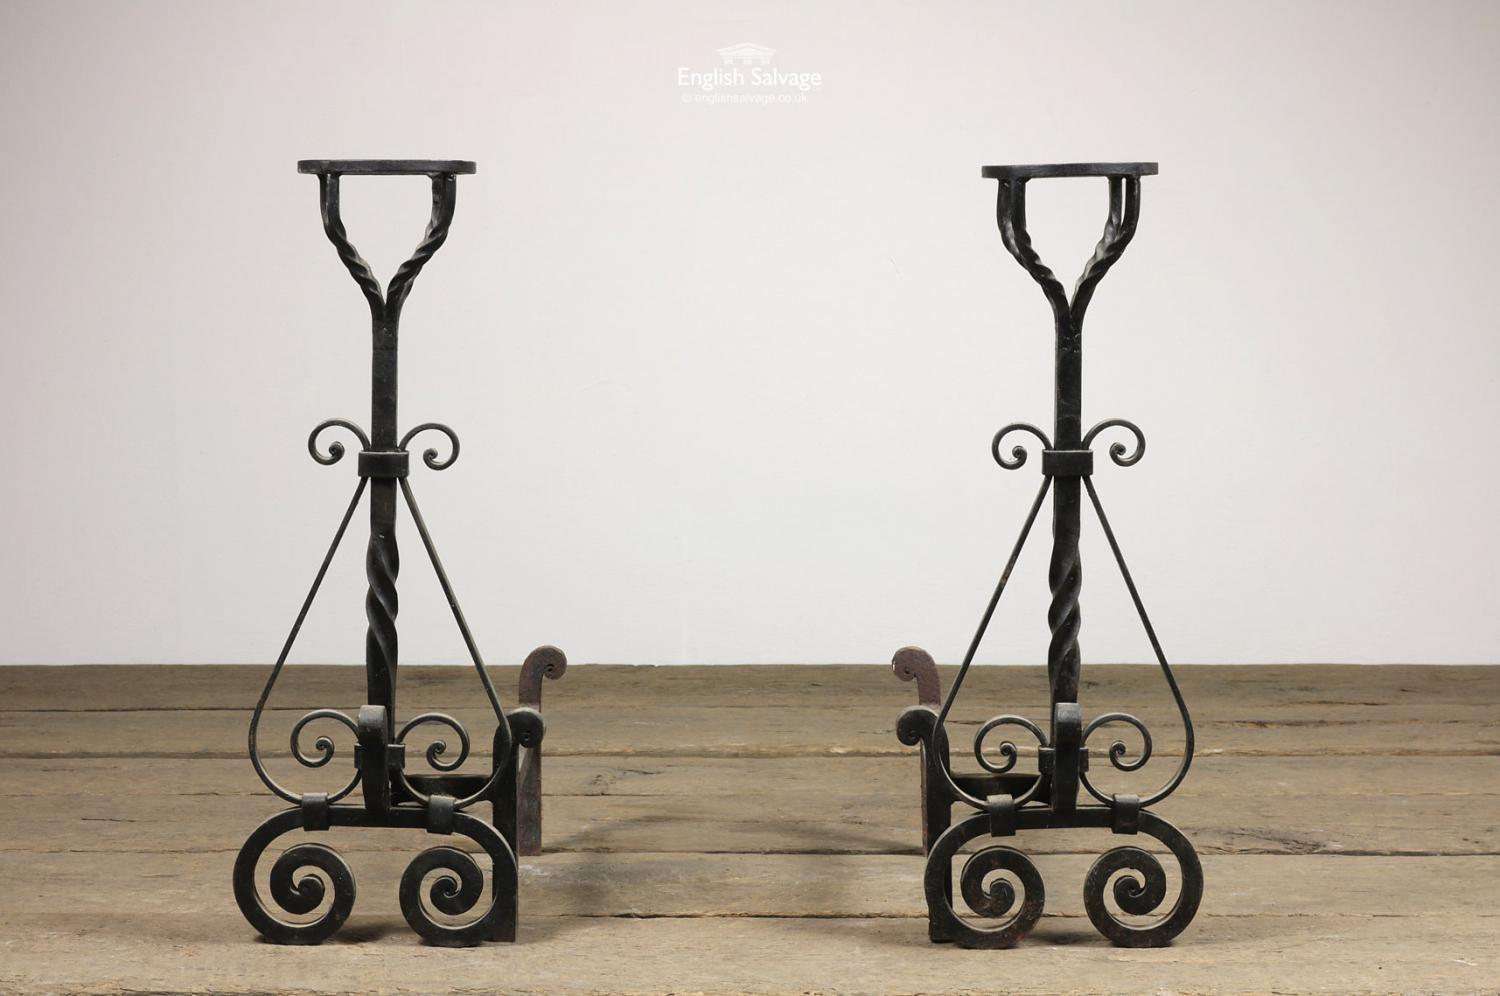 Reclaimed wrought iron fire dogs with barley twist, scroll detailing and cups. Max suitable grate depth is roughly 32cm.

Small amount of surface rust.